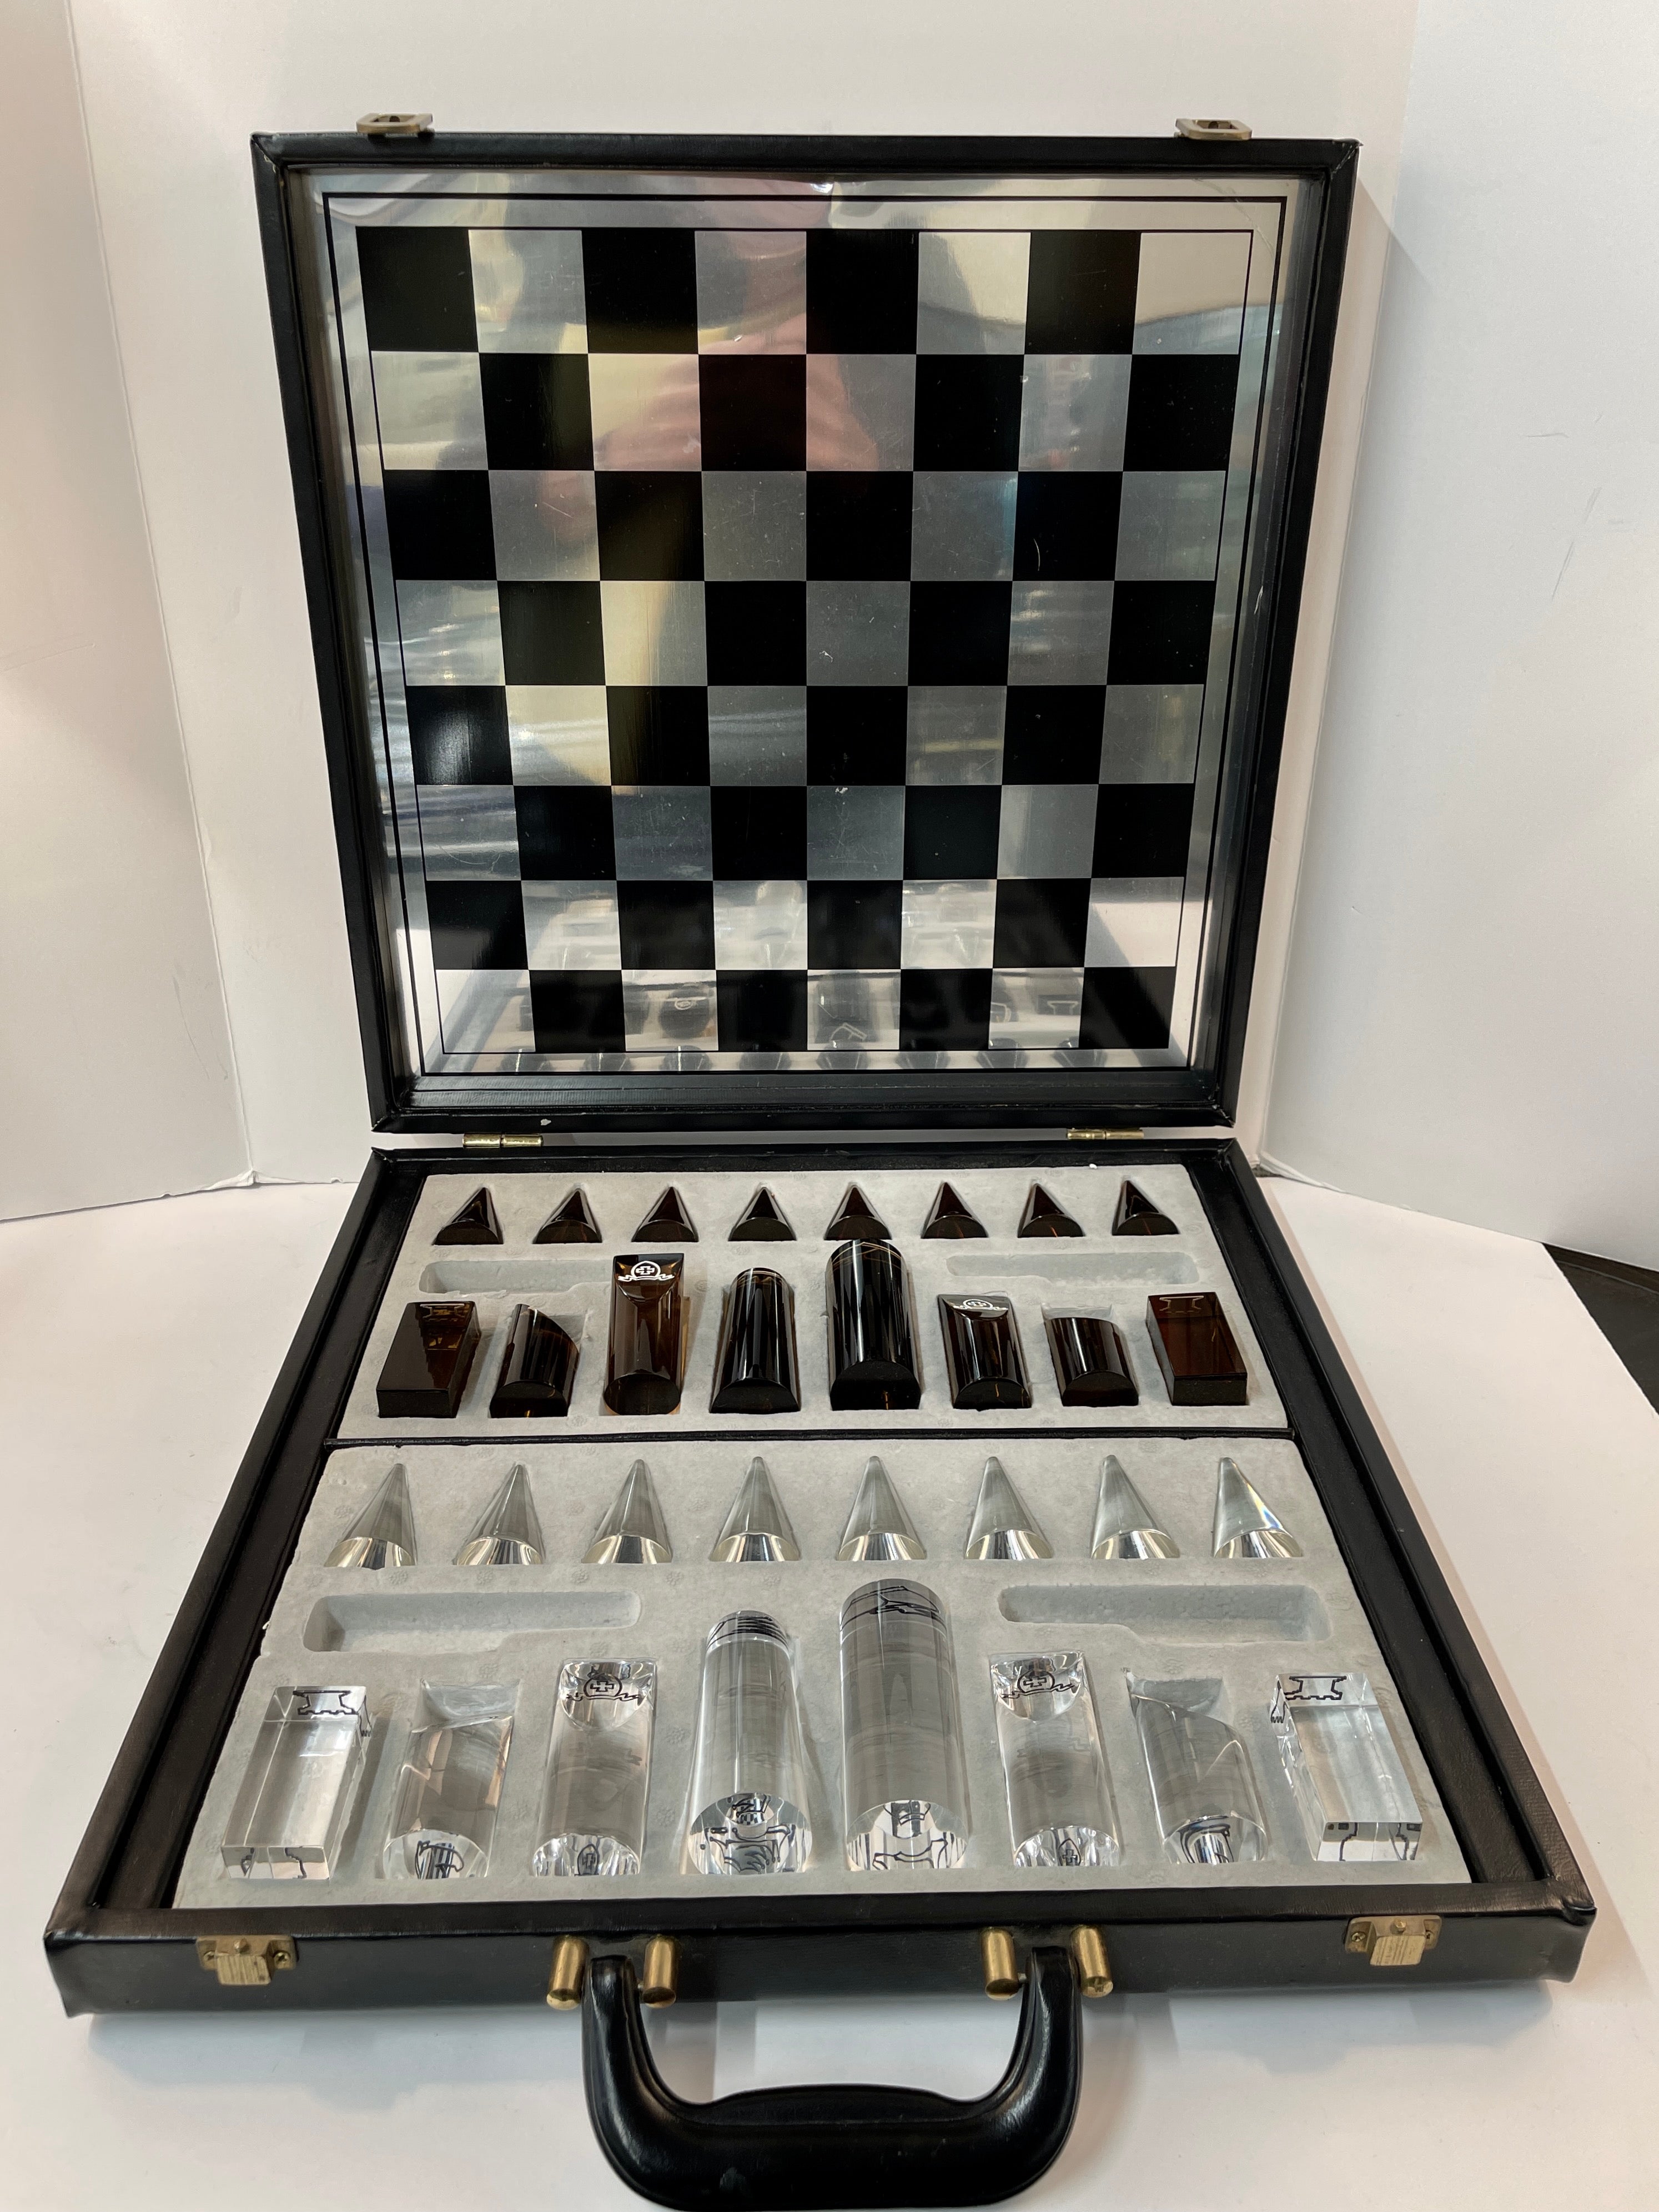 1970’s lucite chess set. The pieces are in a smoky brown and clear acrylic with a fitted case with a board built into the top. The case is vinyl I believe. The case is approximately 16 inches square. Tallest piece. Is 3.5 inches tall. The pawns are